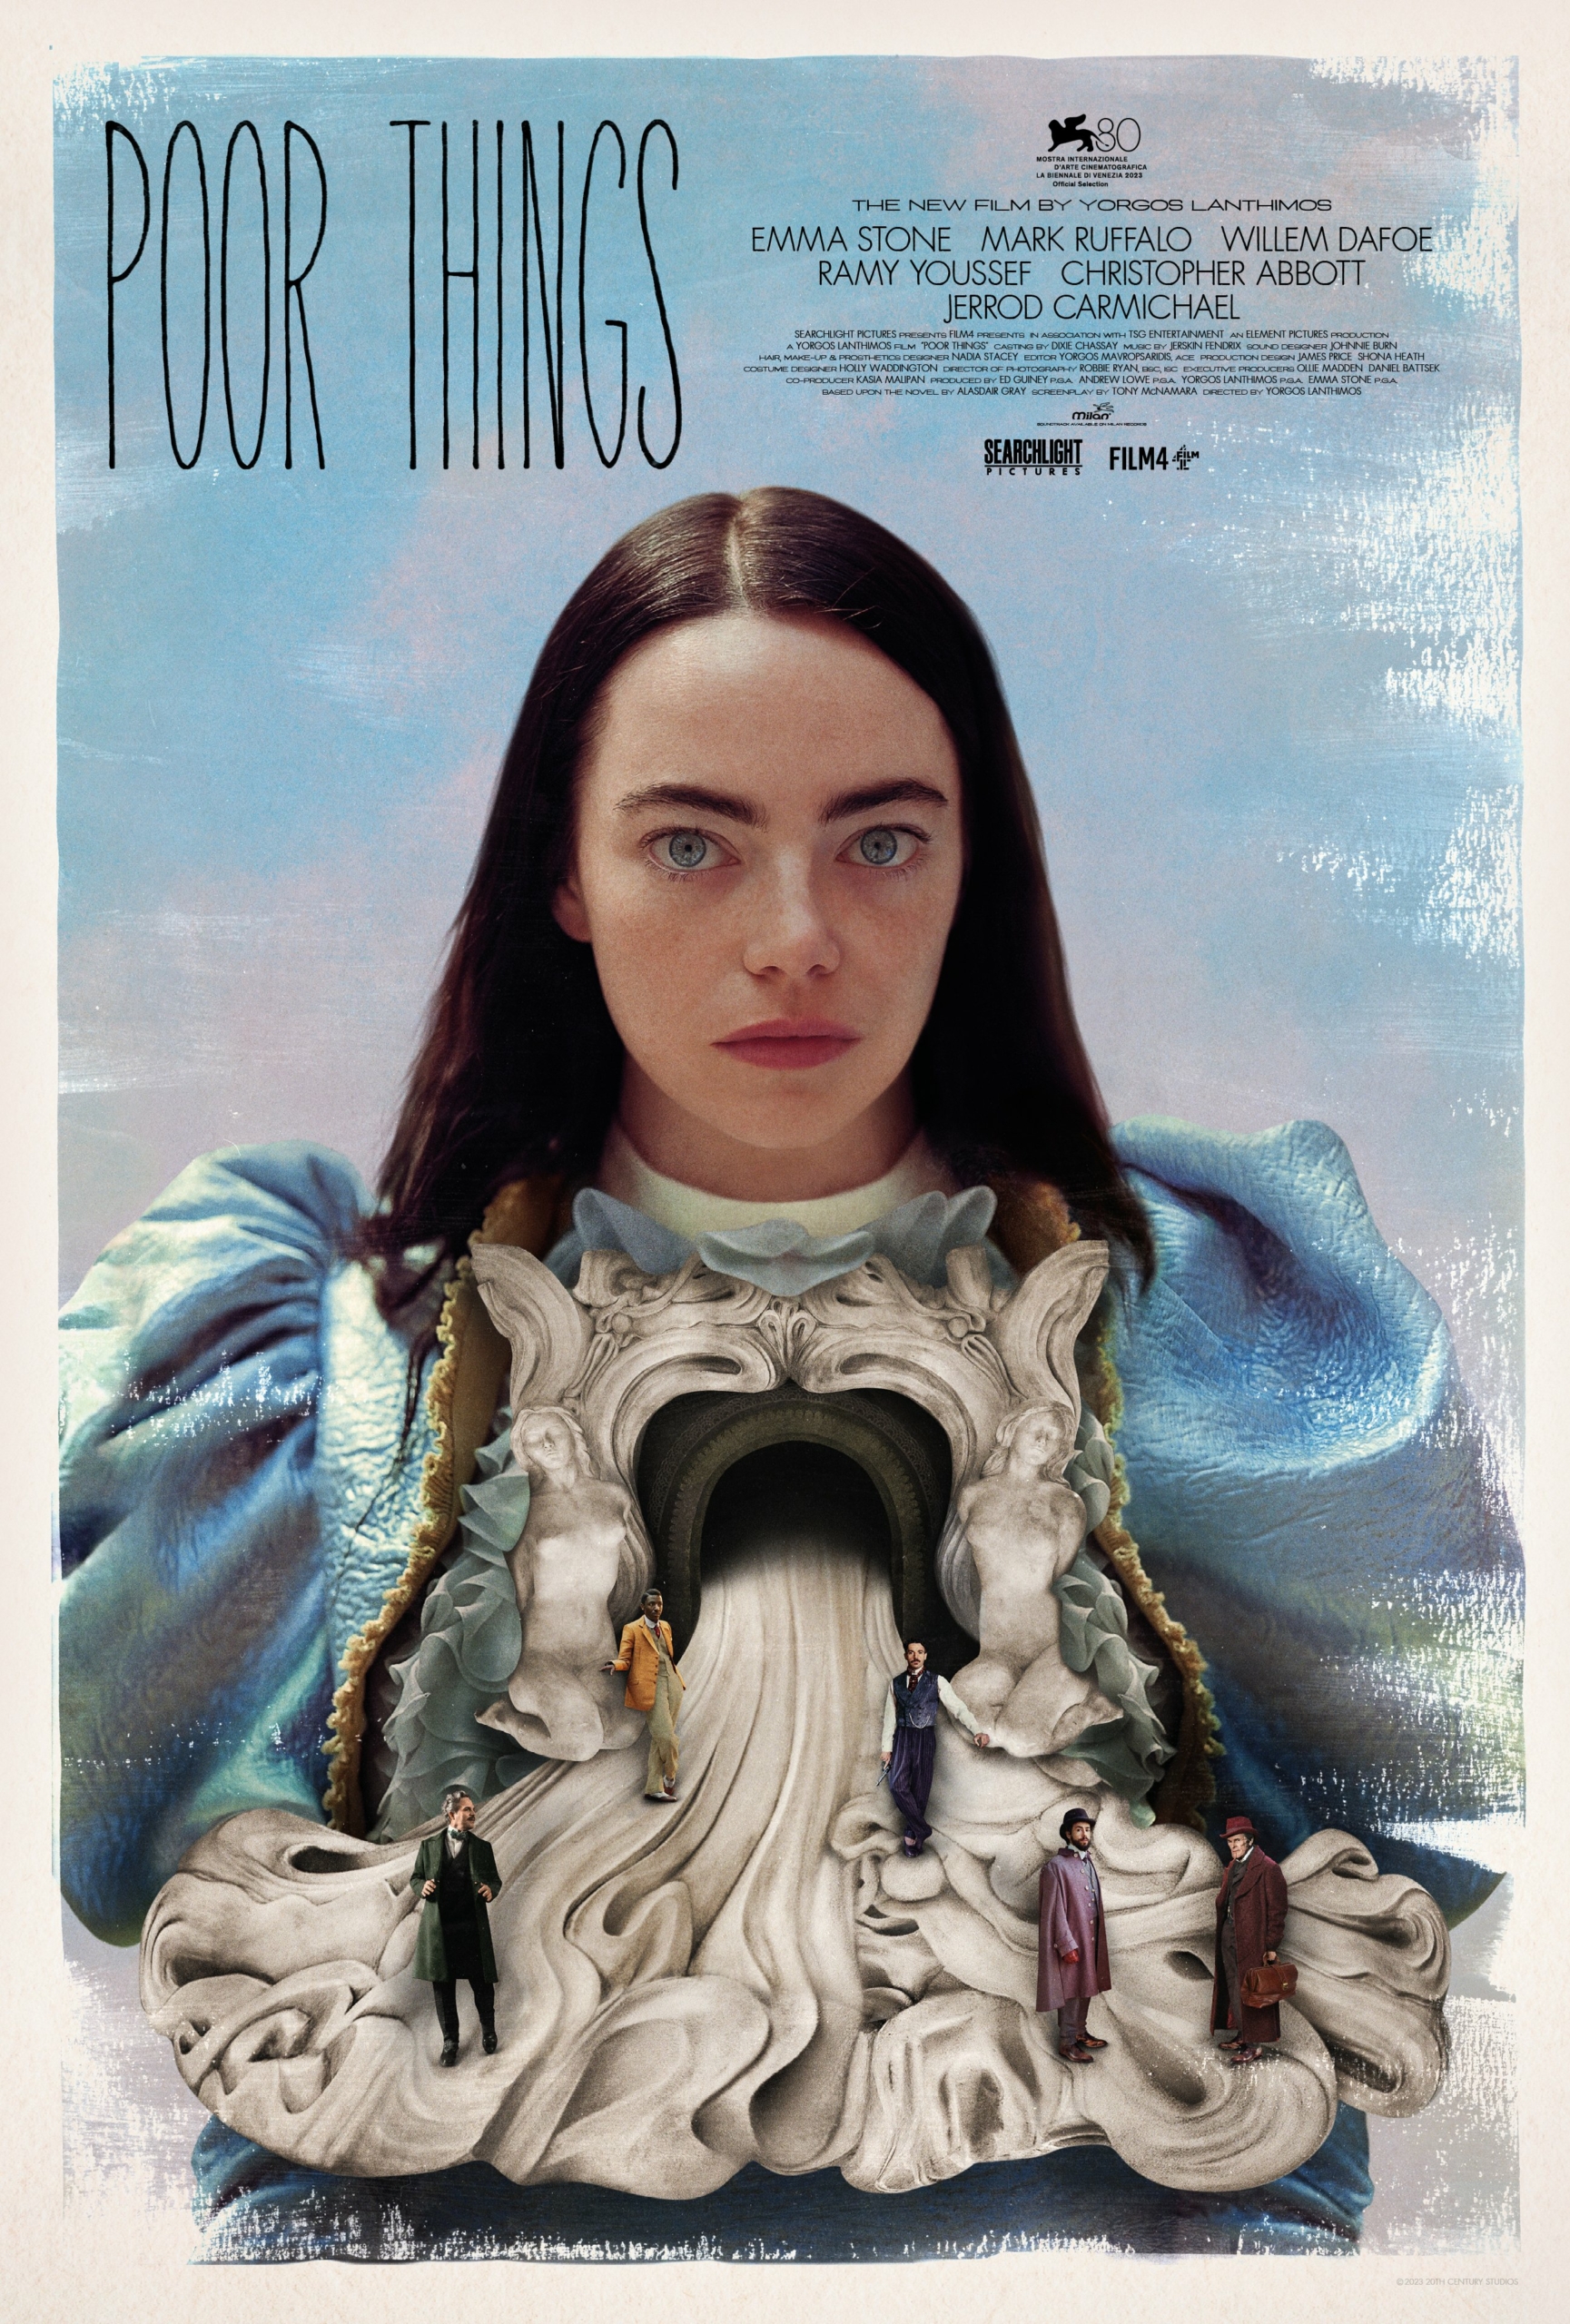 Poor Things review: A Gloriously Wild Feminist Odyssey